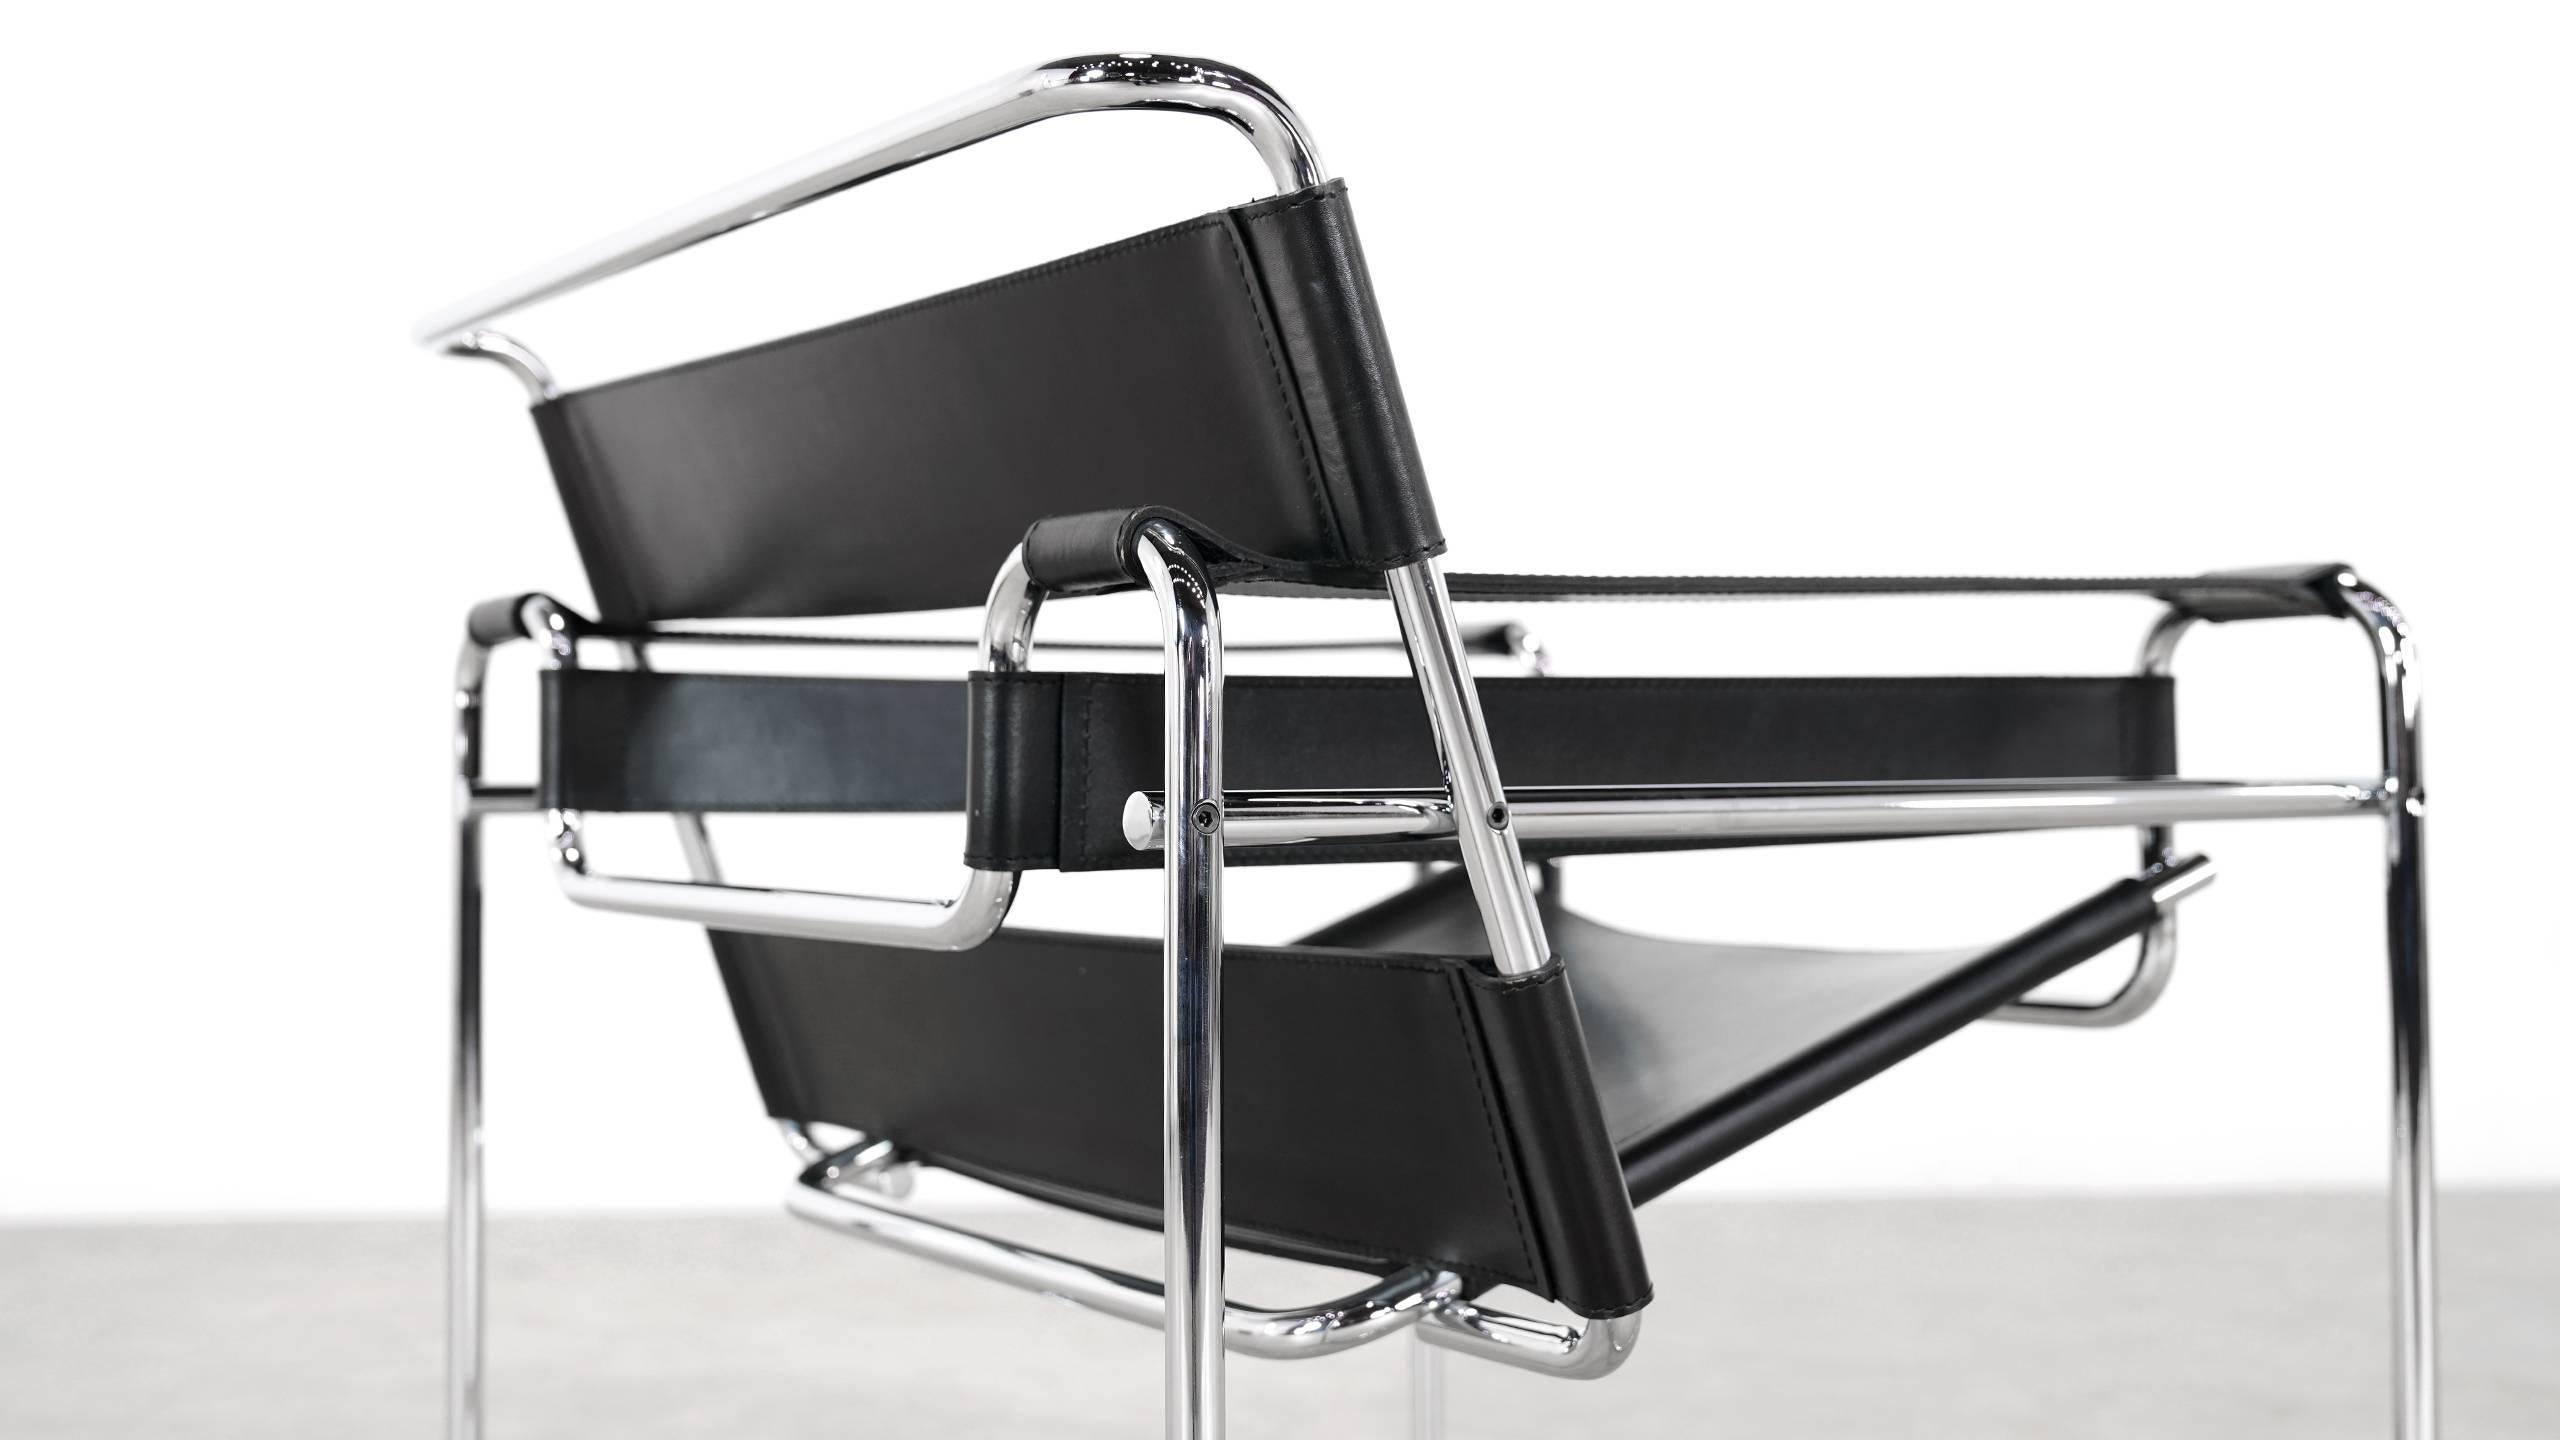 Wassily chair
Marcel Breuer, 1925

Inspired by the frame of a bicycle and influenced by the constructivist theories of the De Stjil movement, 
Marcel Breuer was still an apprentice at the Bauhaus when he reduced the classic club chair to its